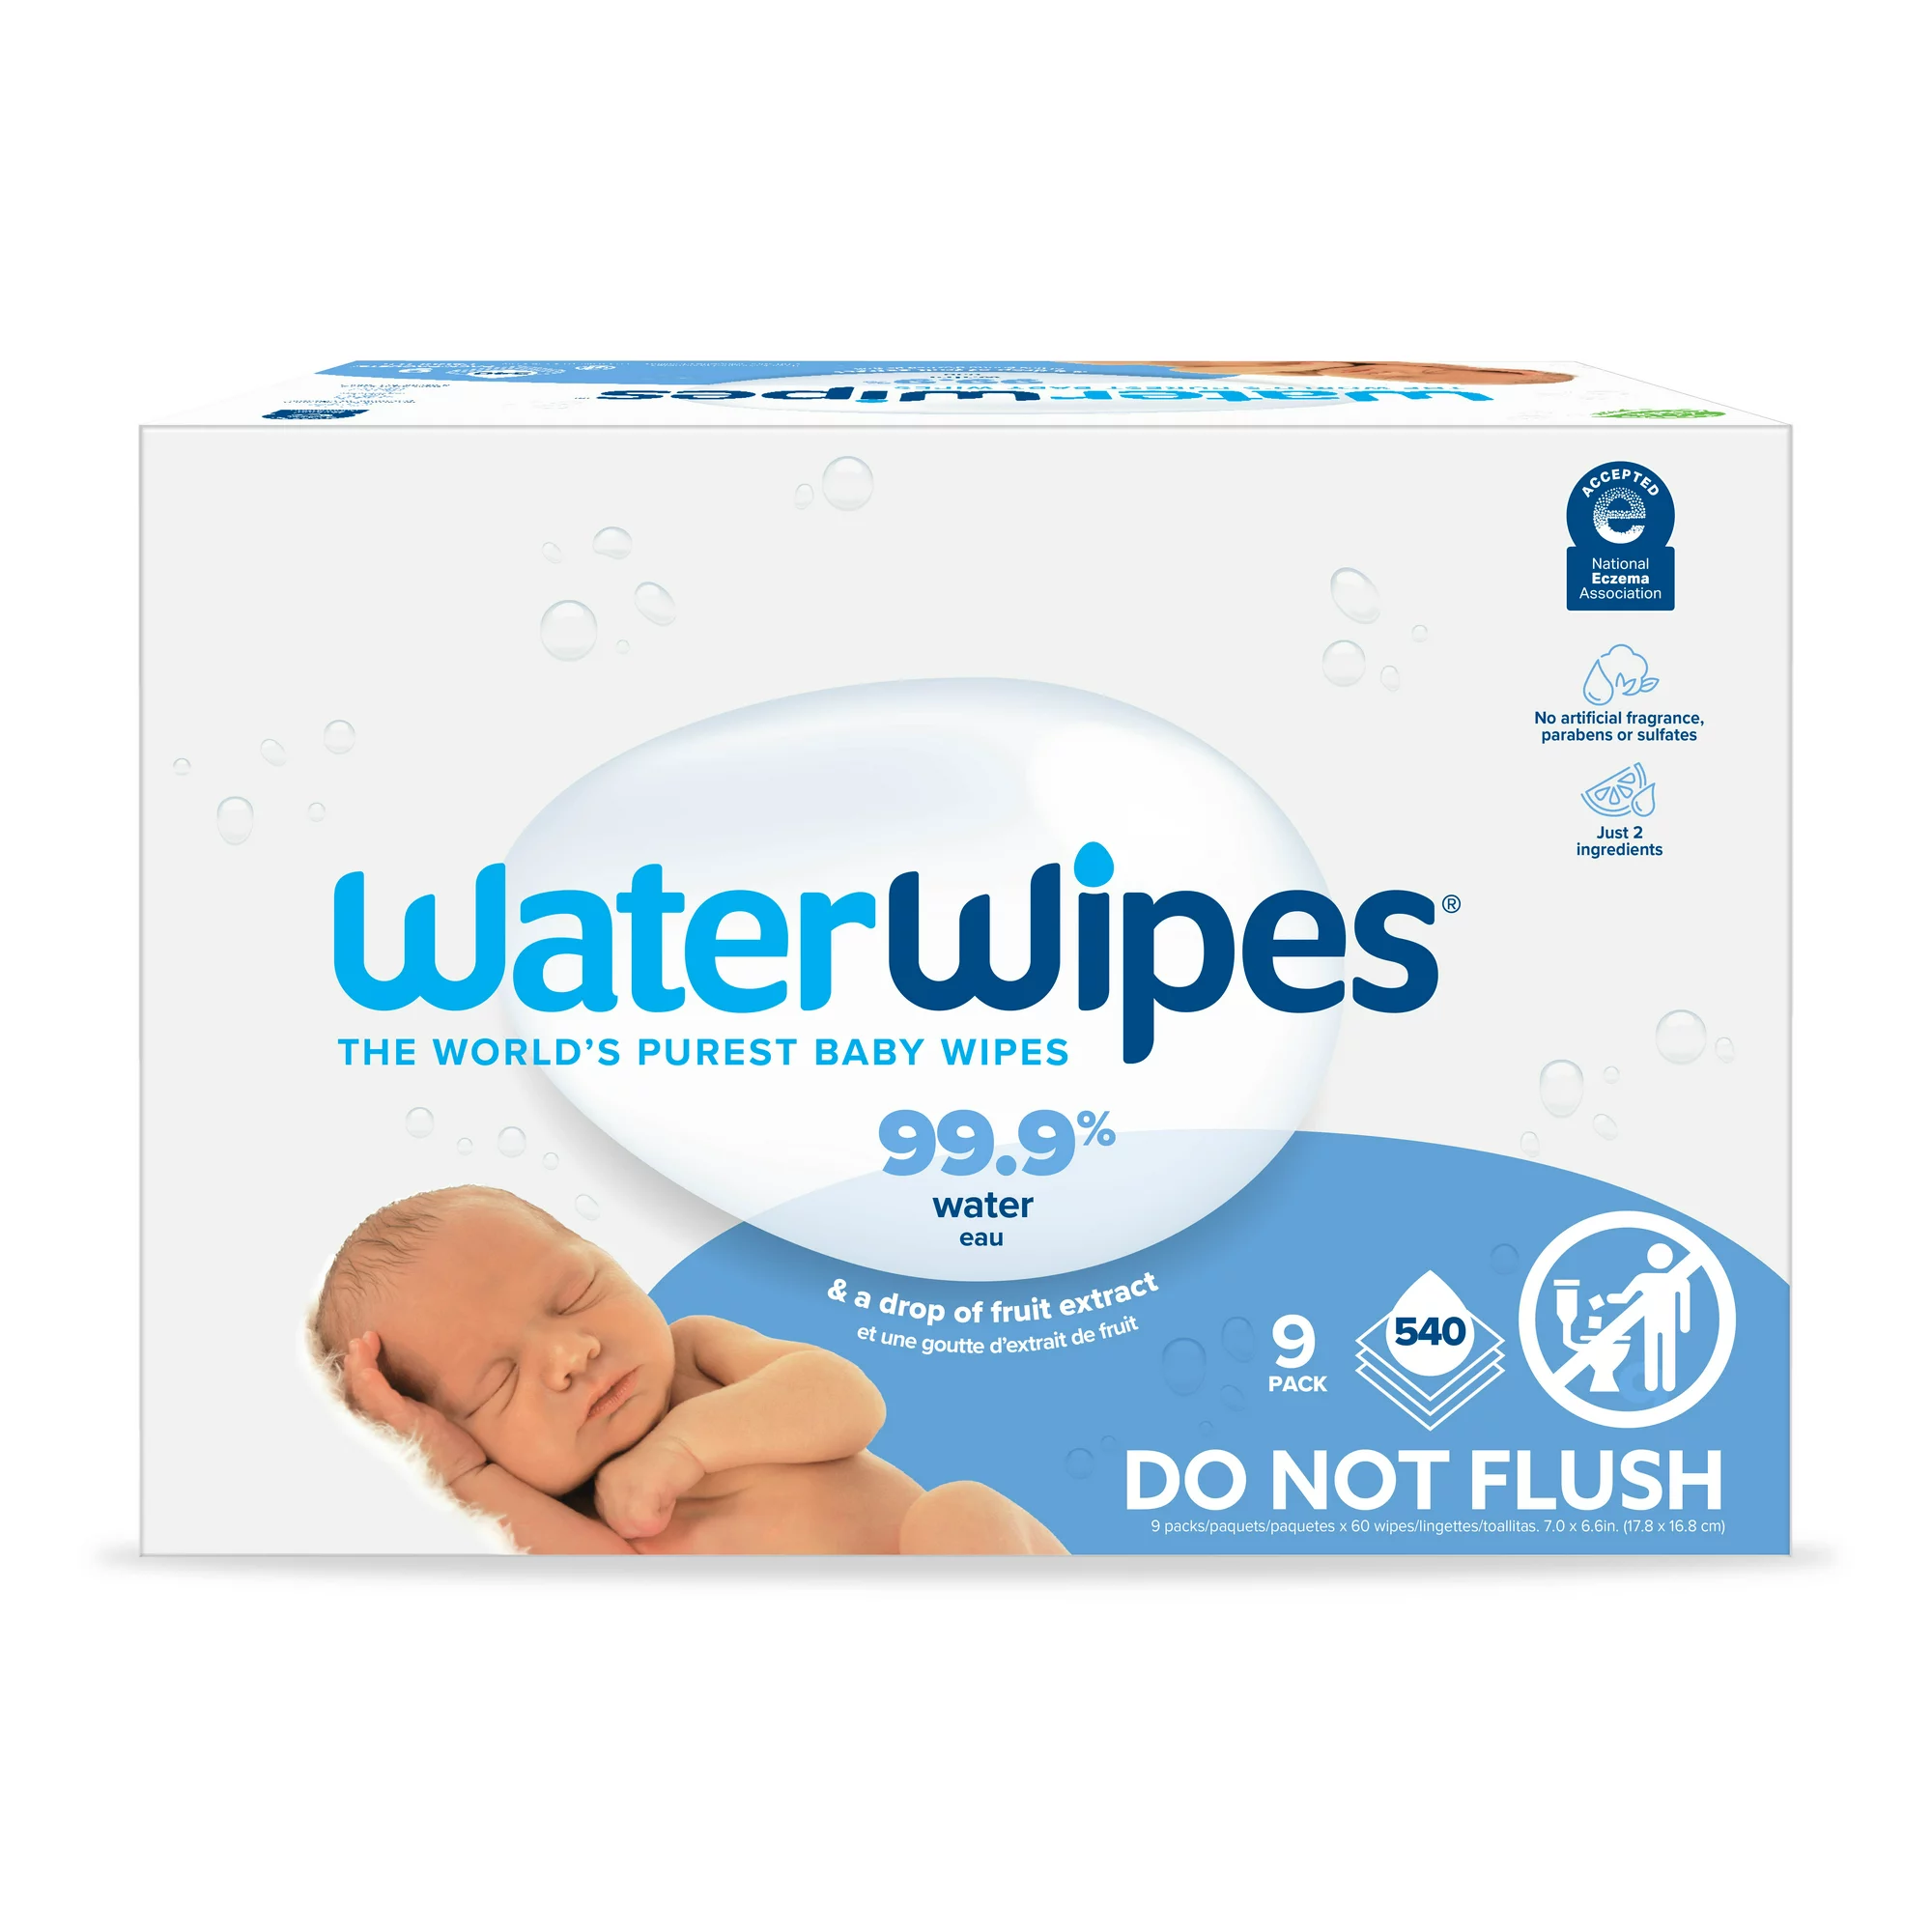 Experience the pinnacle of gentle cleansing with WaterWipes.